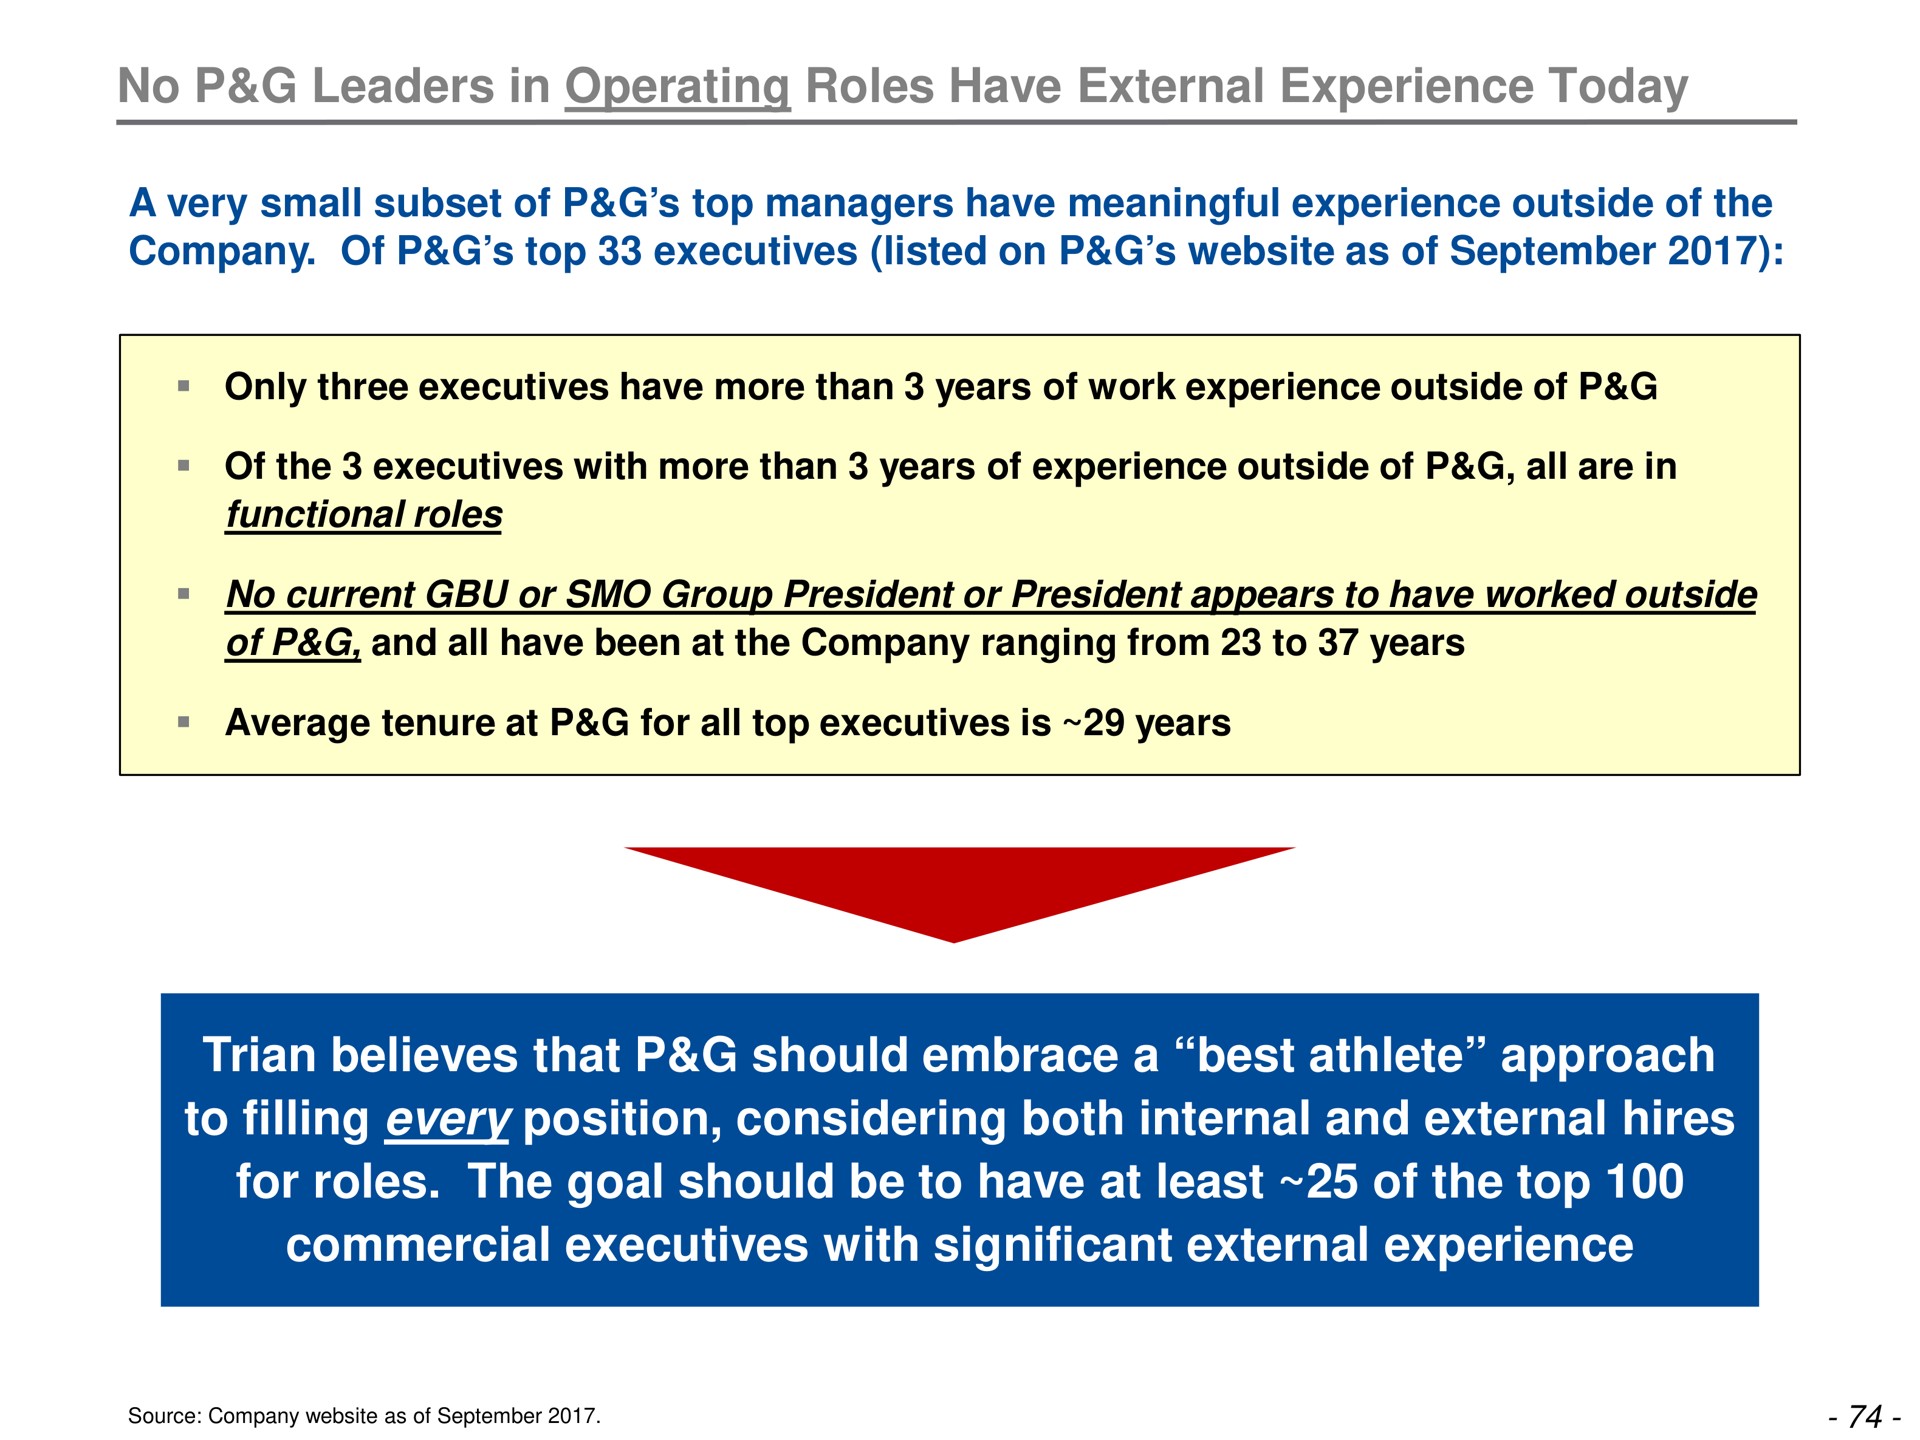 no leaders in operating roles have external experience today believes that should embrace a best athlete approach to filling every position considering both internal and external hires for roles the goal should be to have at least of the top commercial executives with significant external experience | Trian Partners